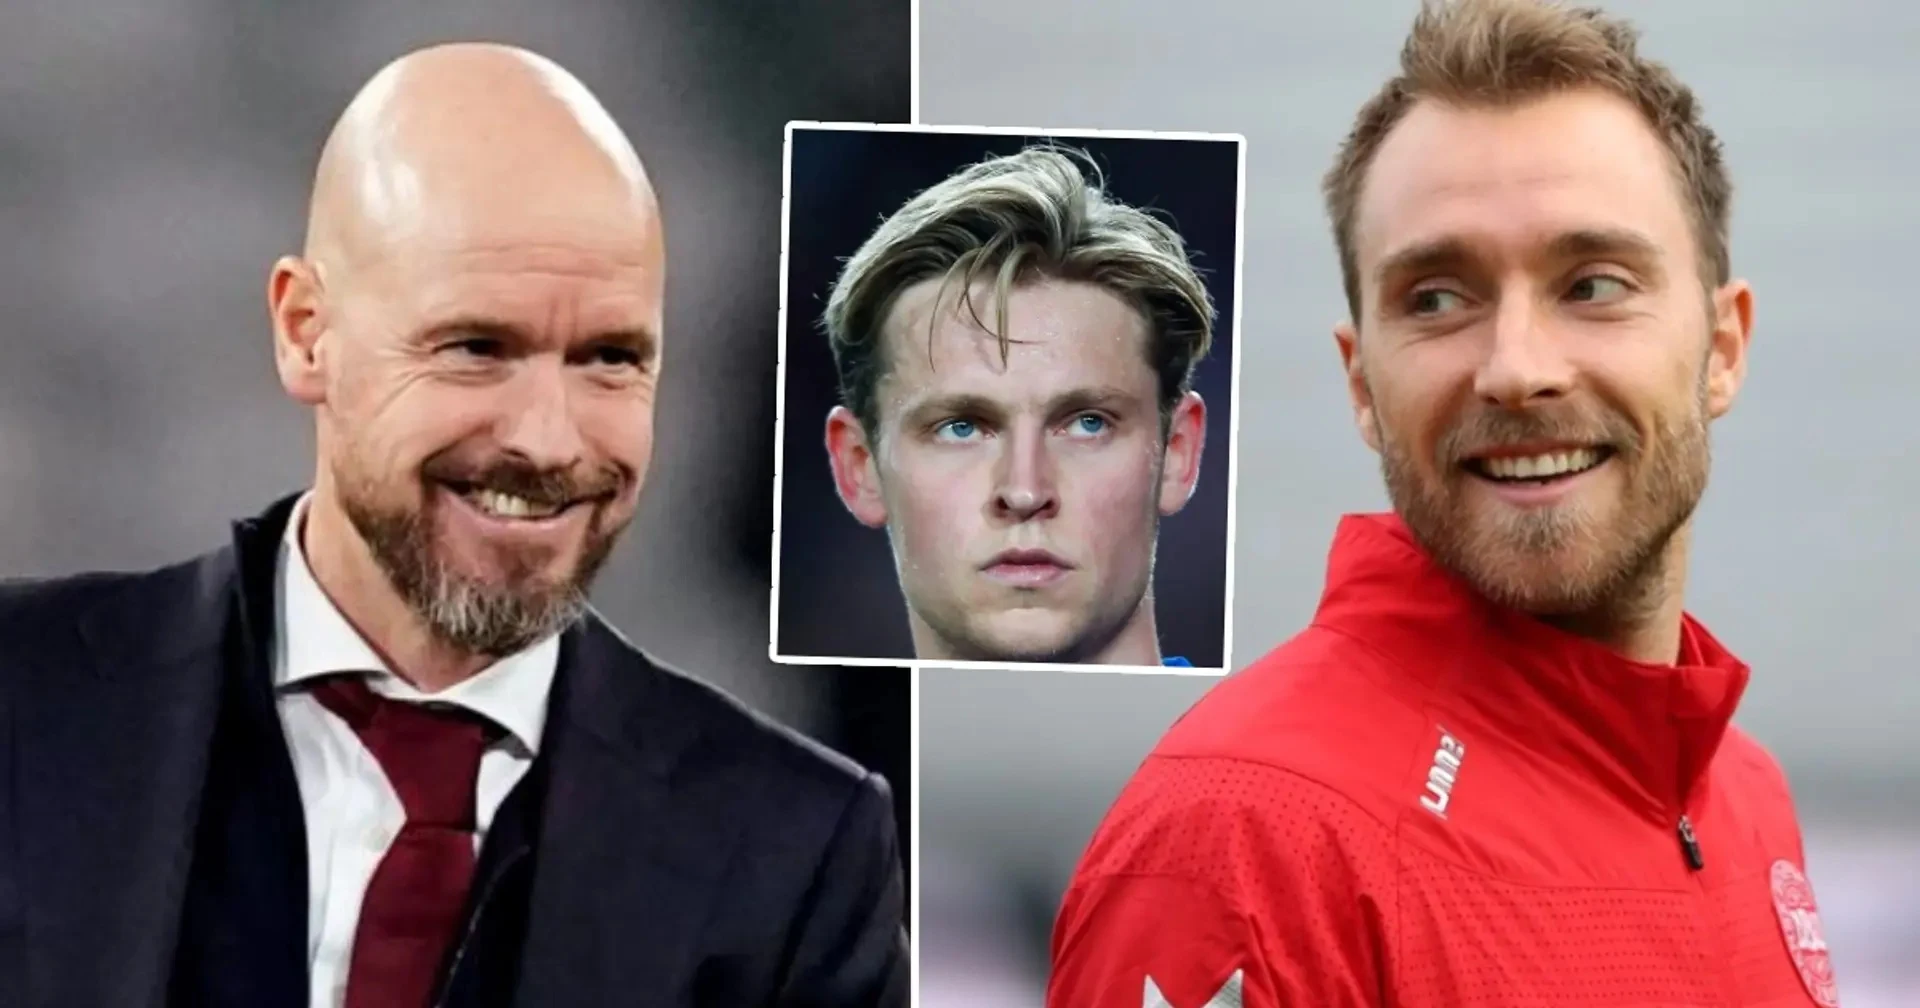 Revealed: What Ten Hag told Eriksen about his role at United and potential De Jong link